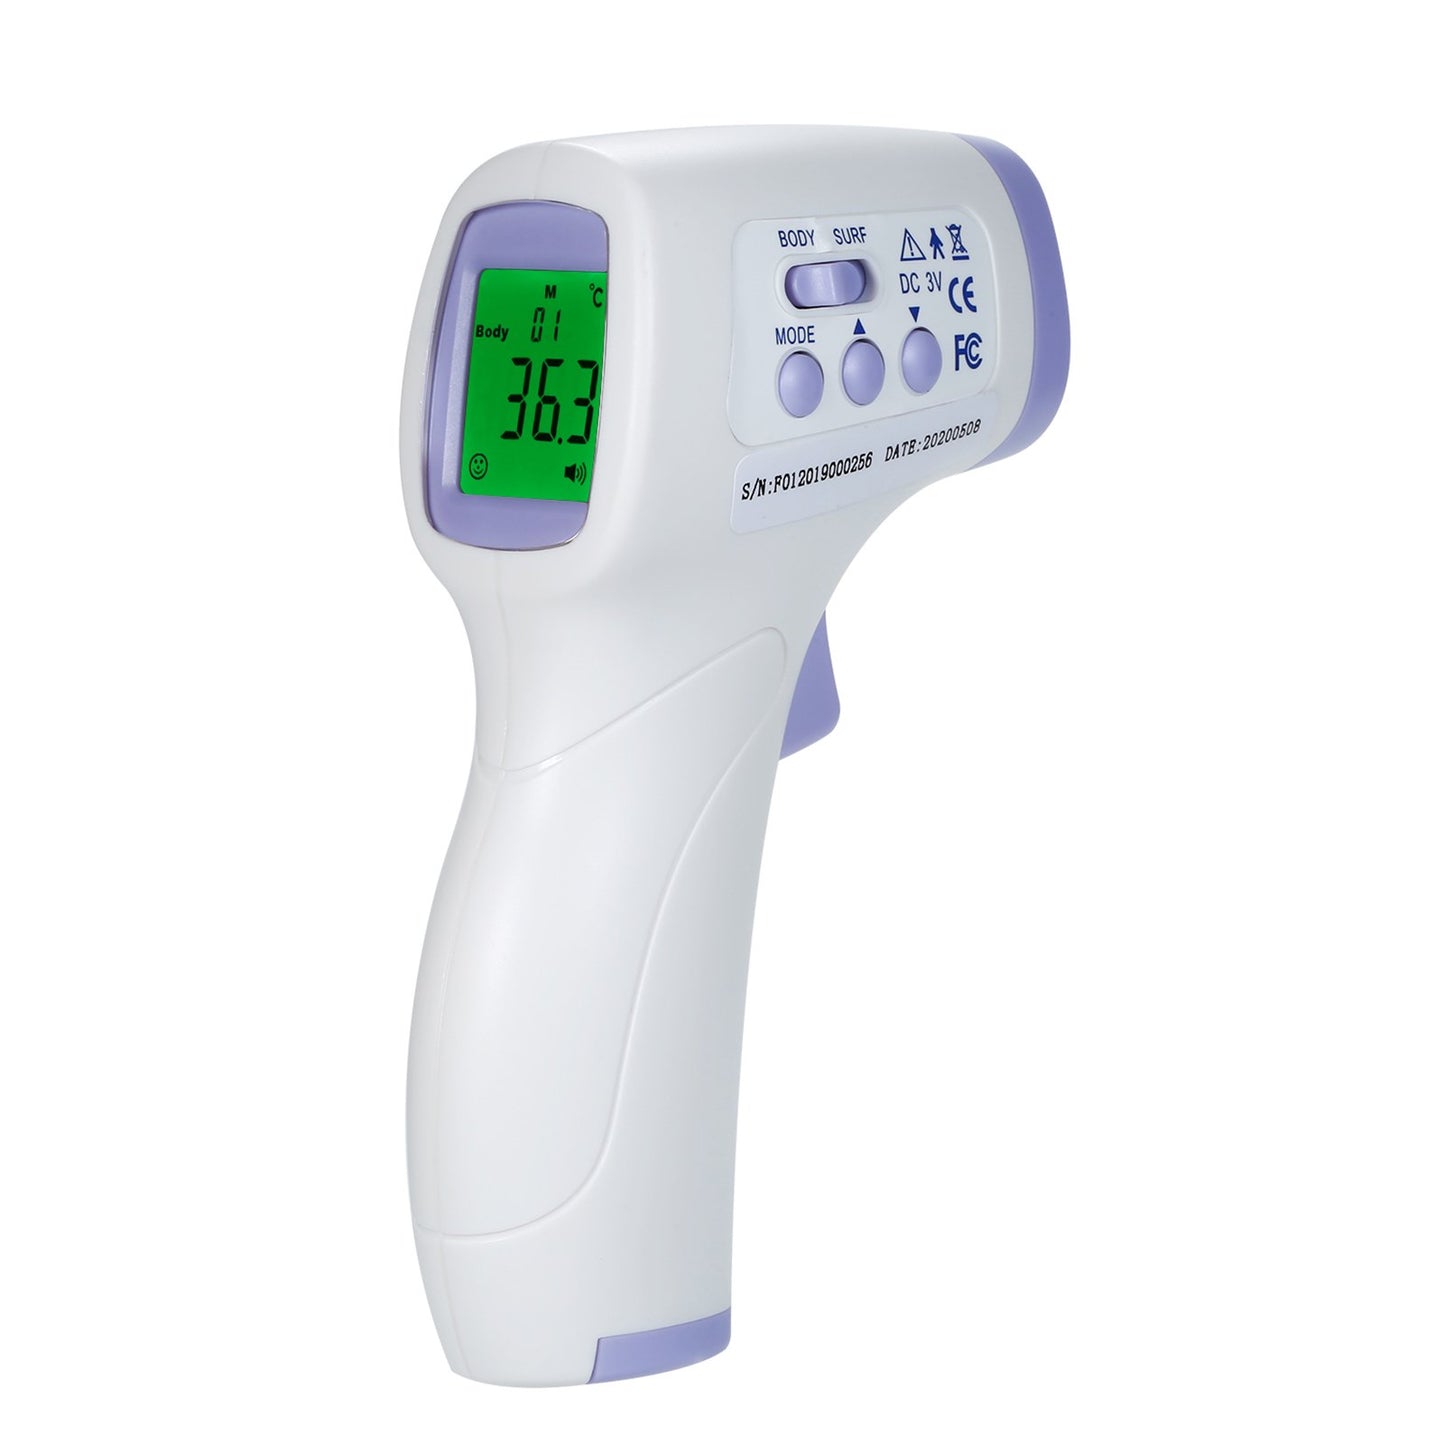 Genkent Infrared Forehead LED Digital Thermometer, No Touch Thermometer Temperature Meter Home Fast Measuring